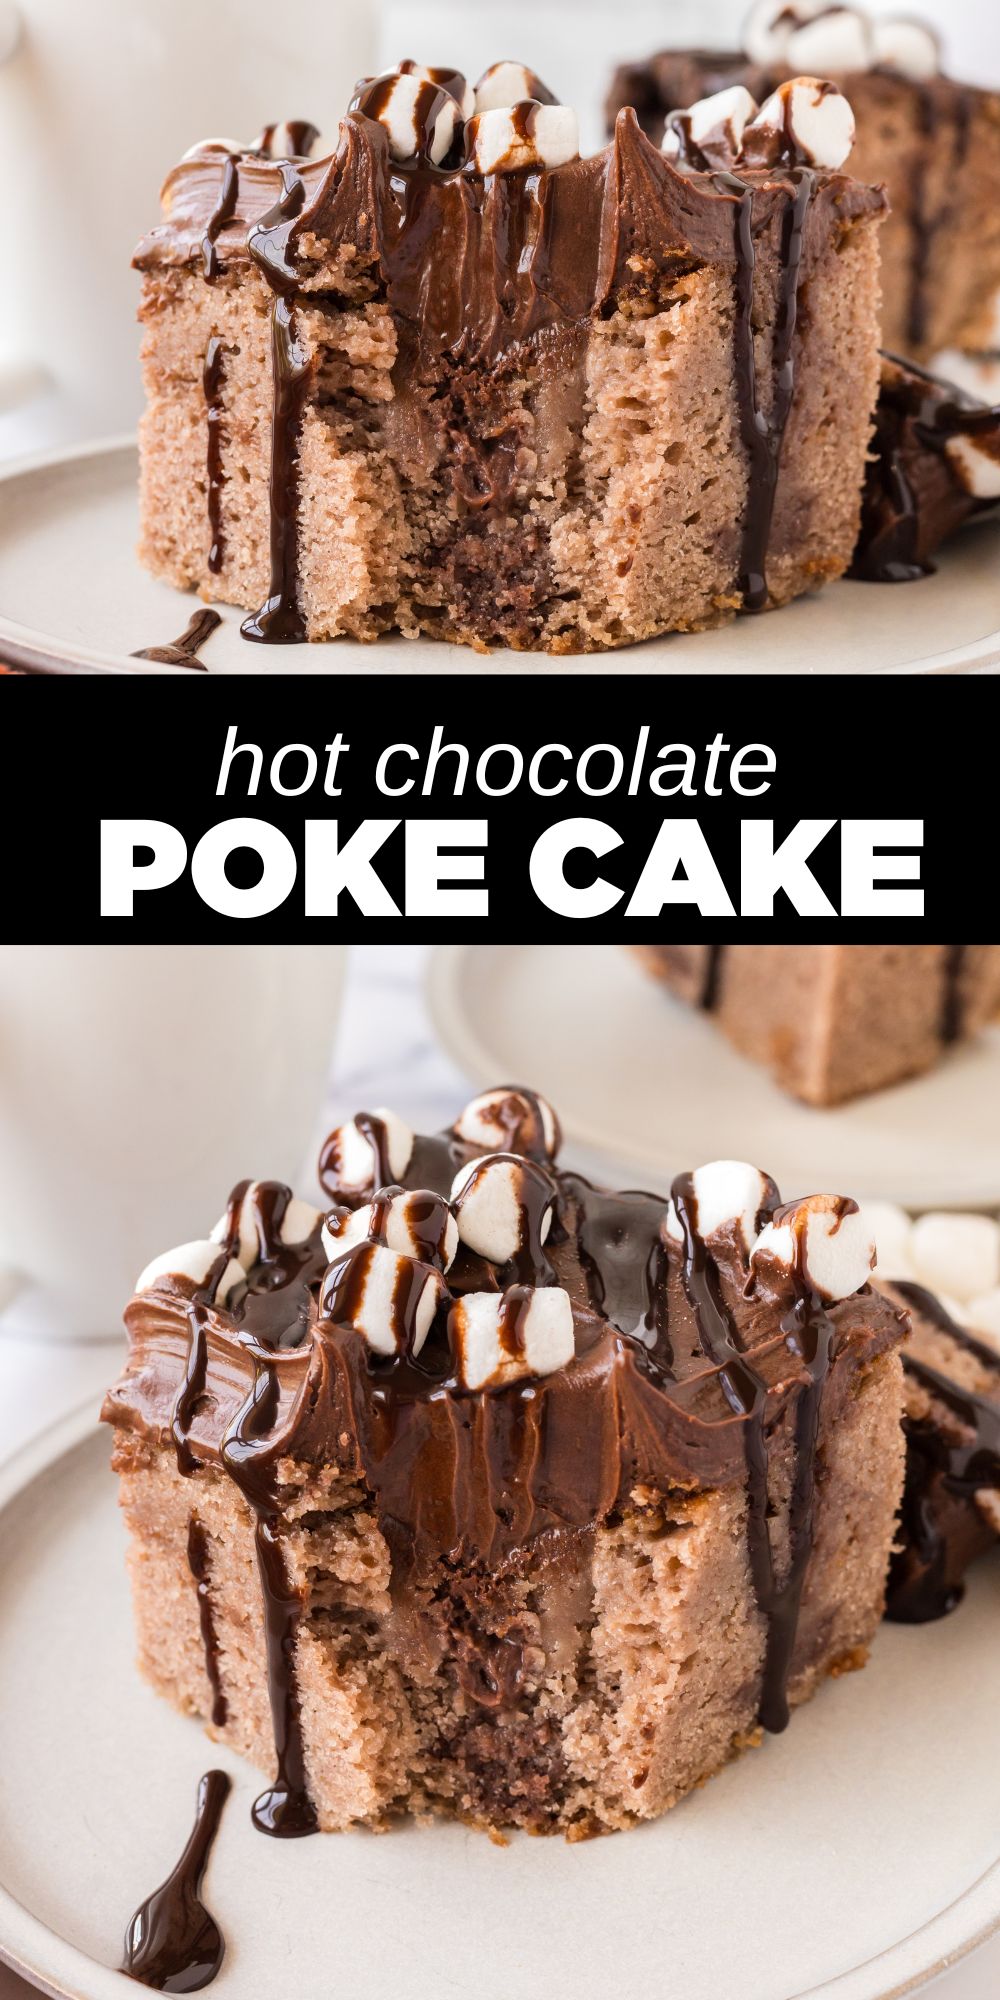 This homemade Hot Chocolate Poke Cake combines all the wonderful flavors of hot chocolate into a super moist and delicious cake. This decadent sweet treat makes the perfect dessert for potlucks, holidays or special occasions.